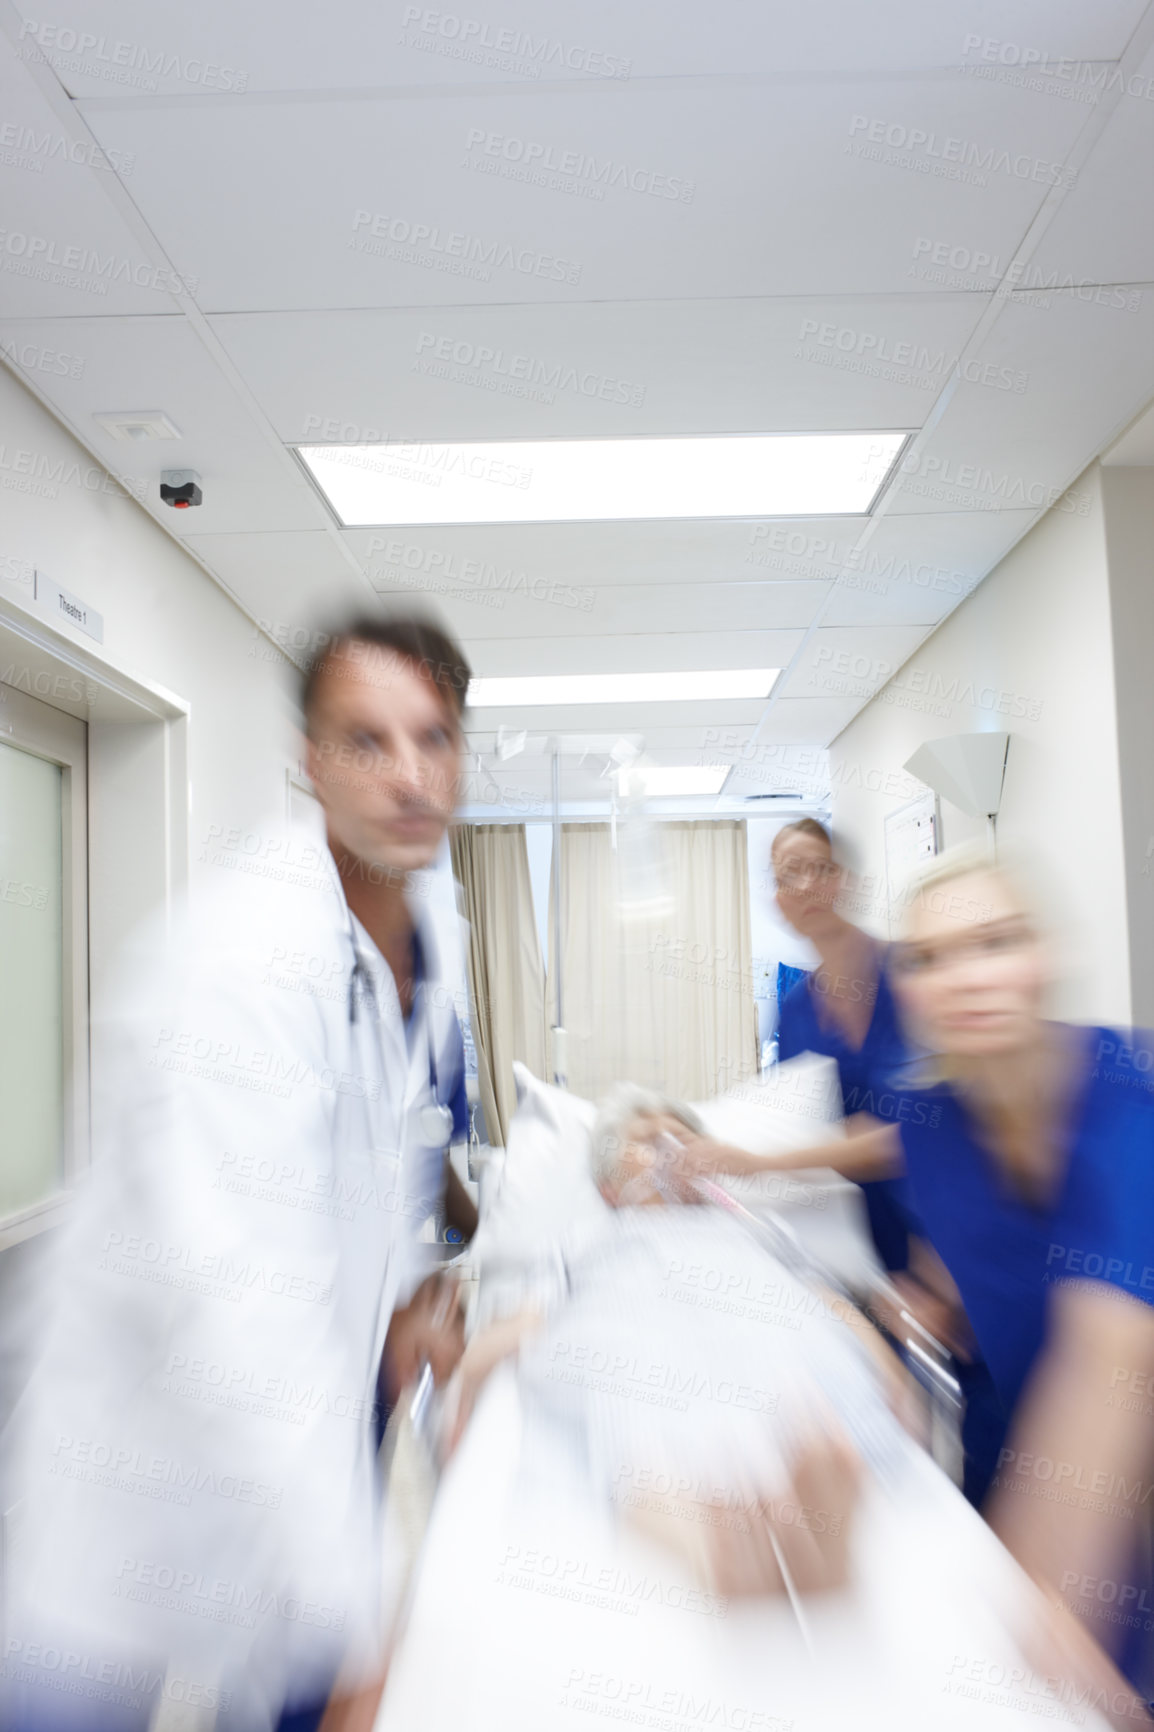 Buy stock photo A group of doctors rushing a patient down the corridor